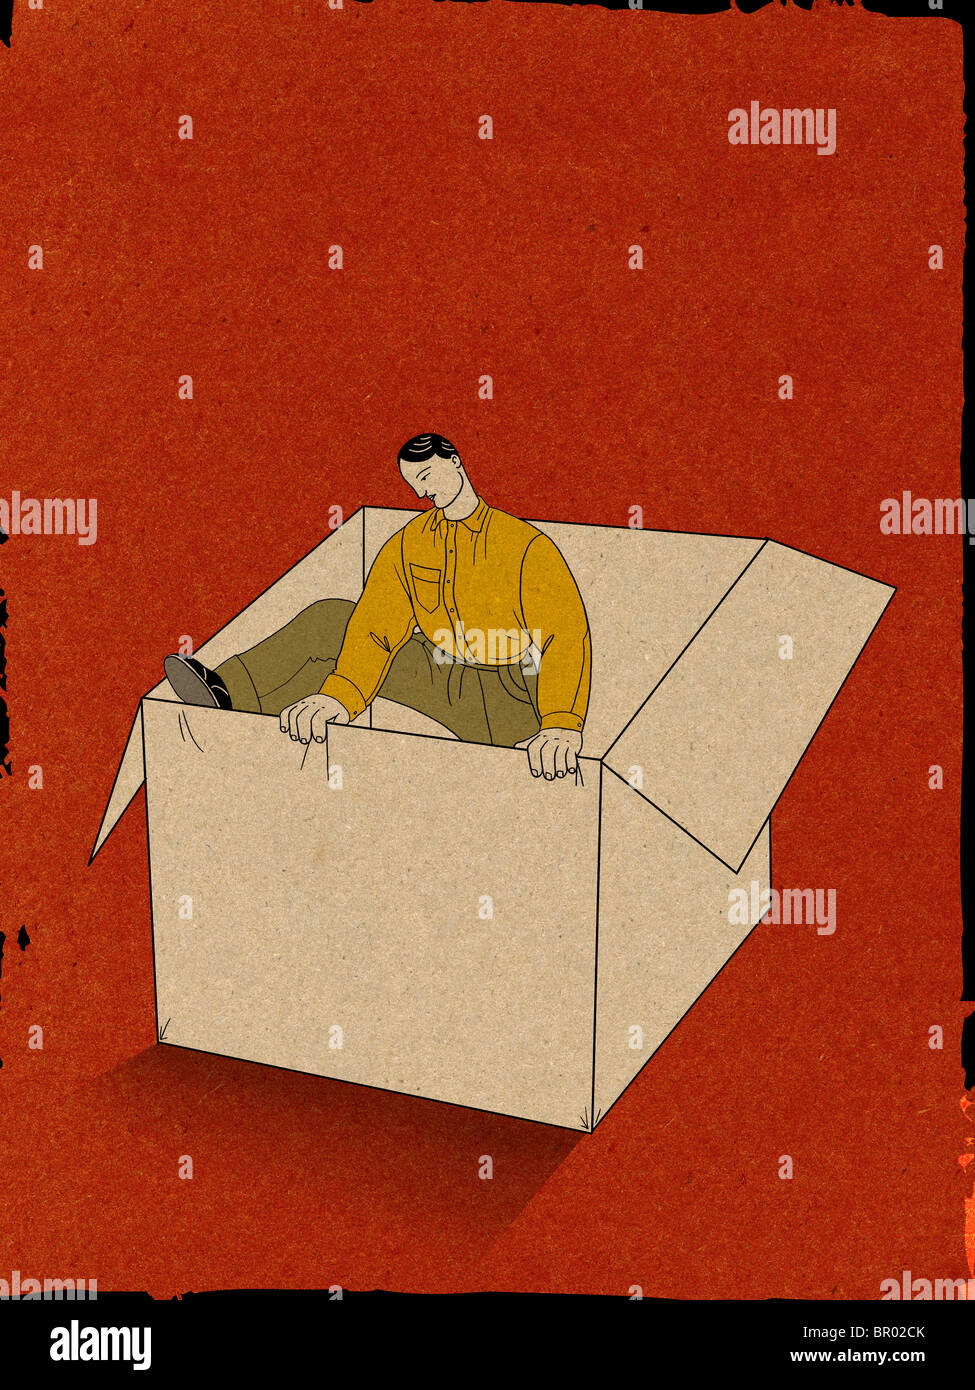 Illustration of a businessman climbing out of a box Stock Photo